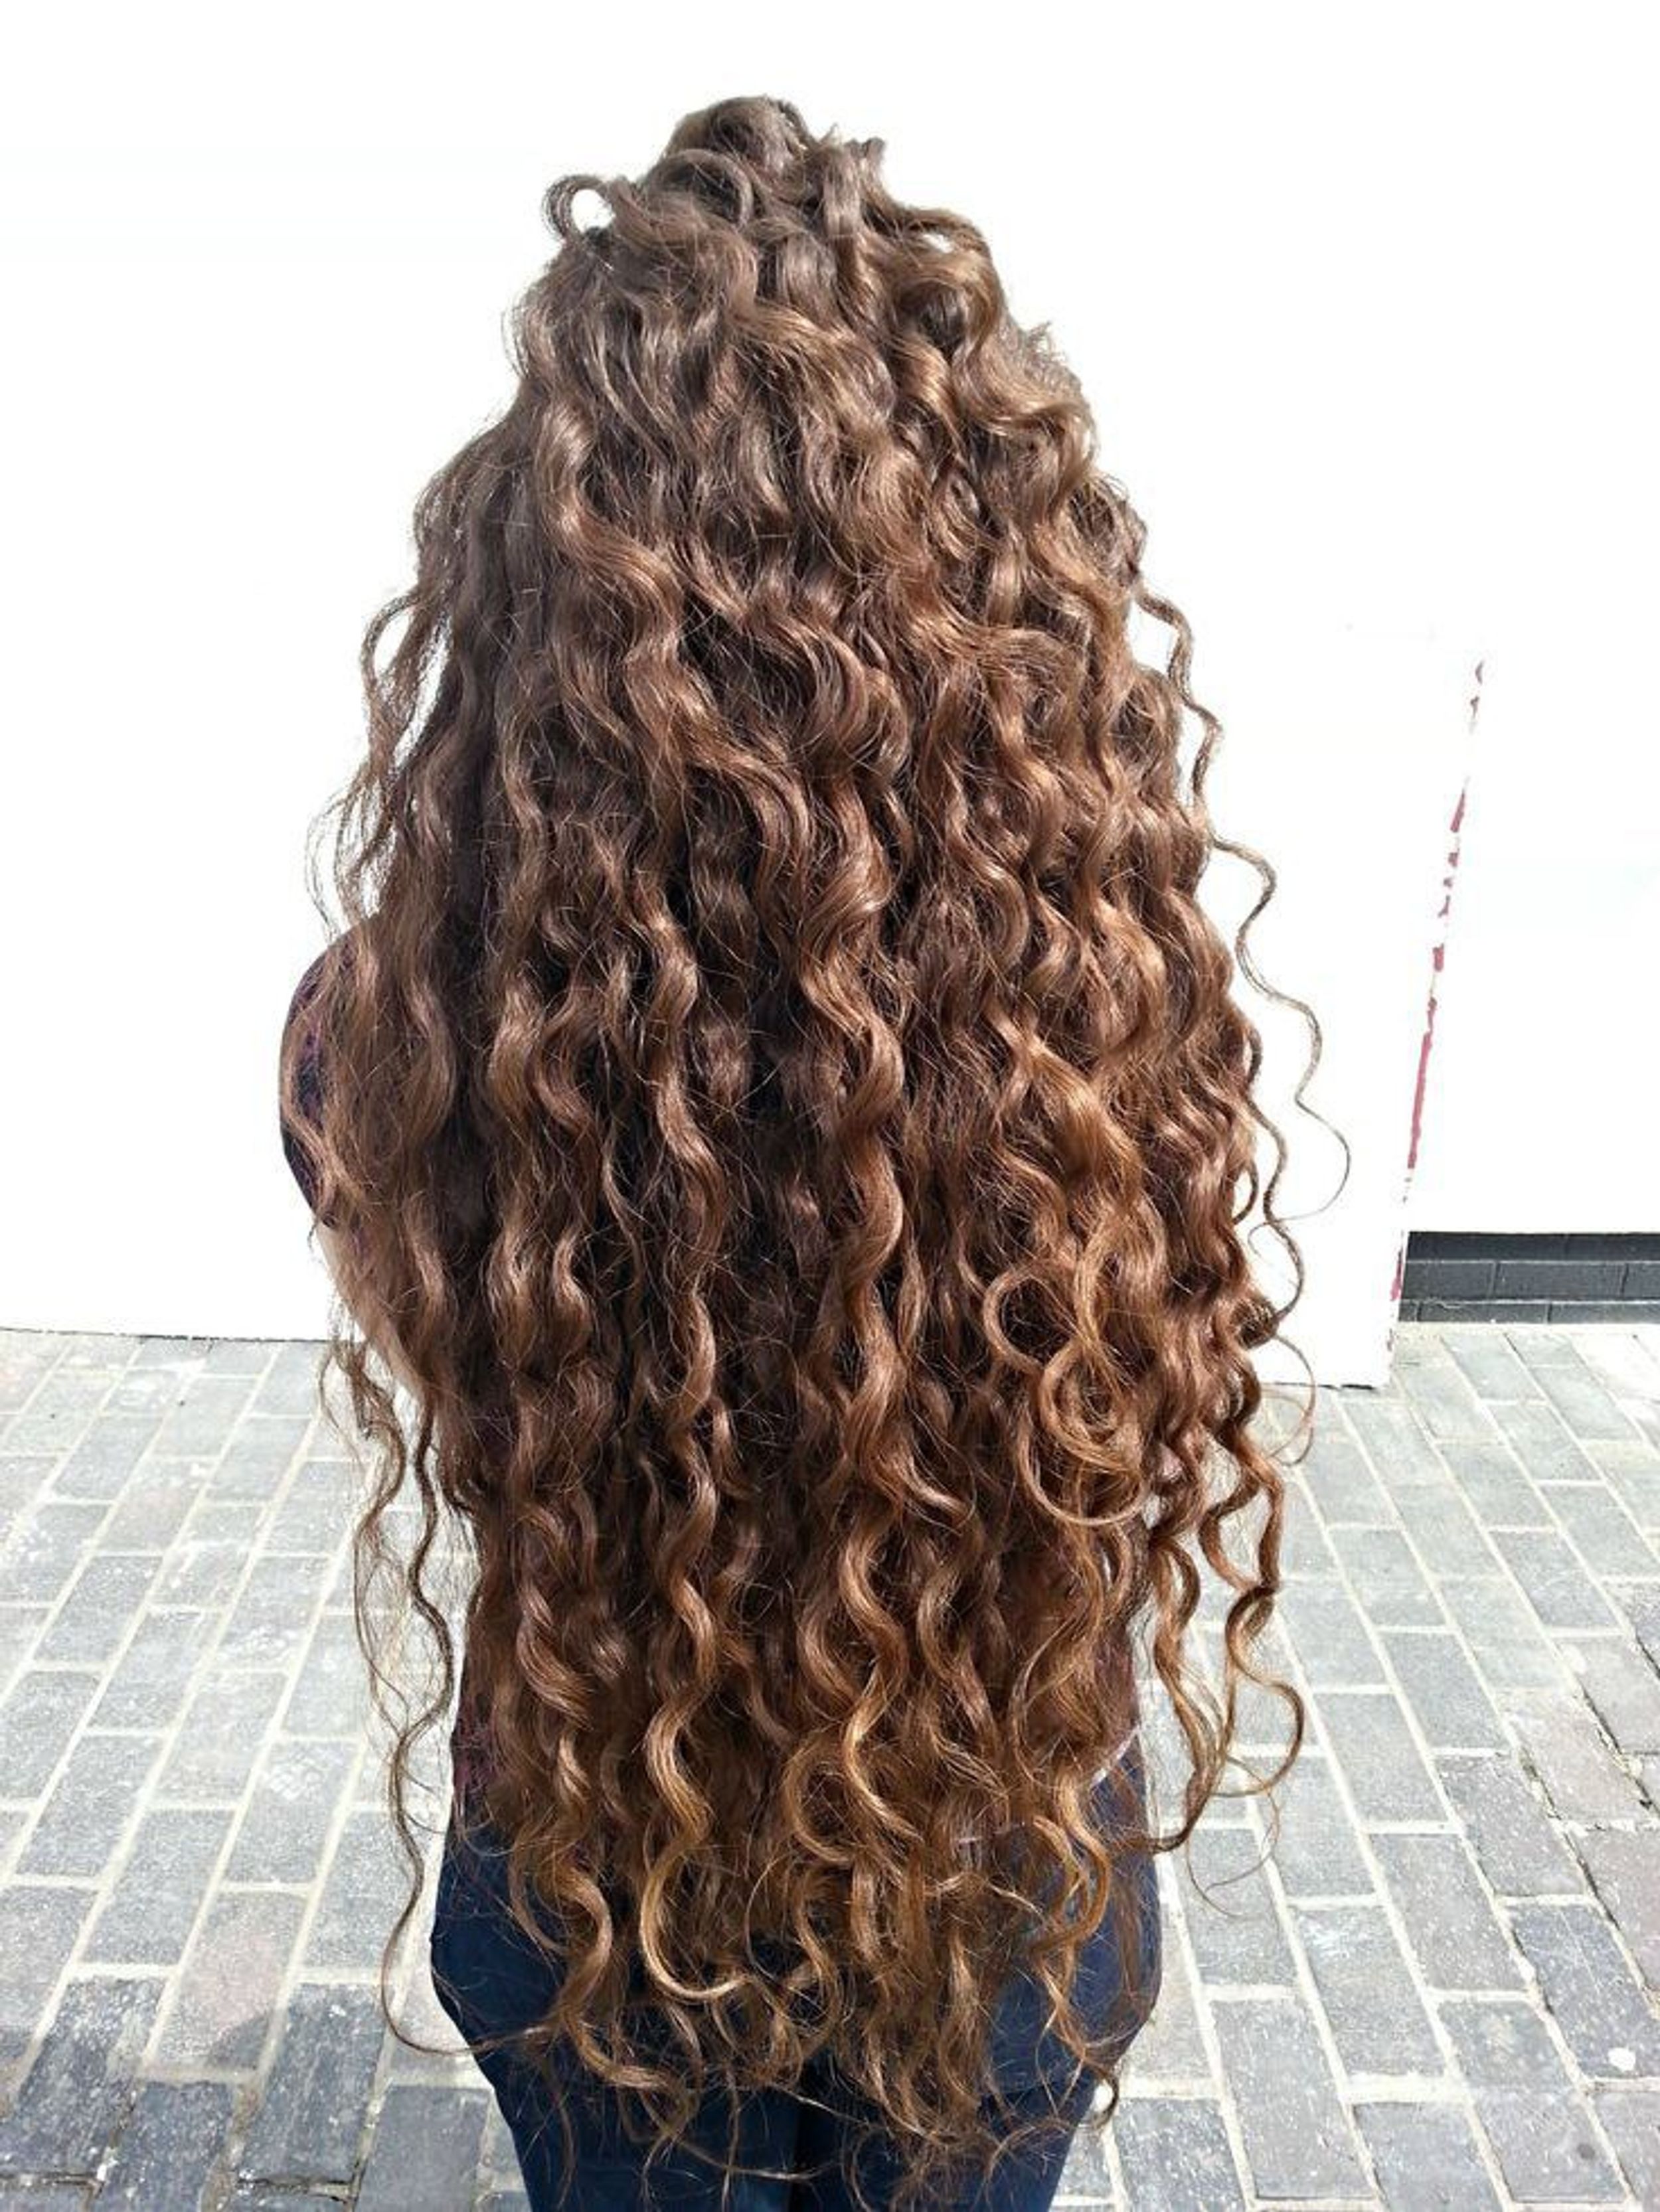 12 Things People With Curly Hair Are Tired of Hearing